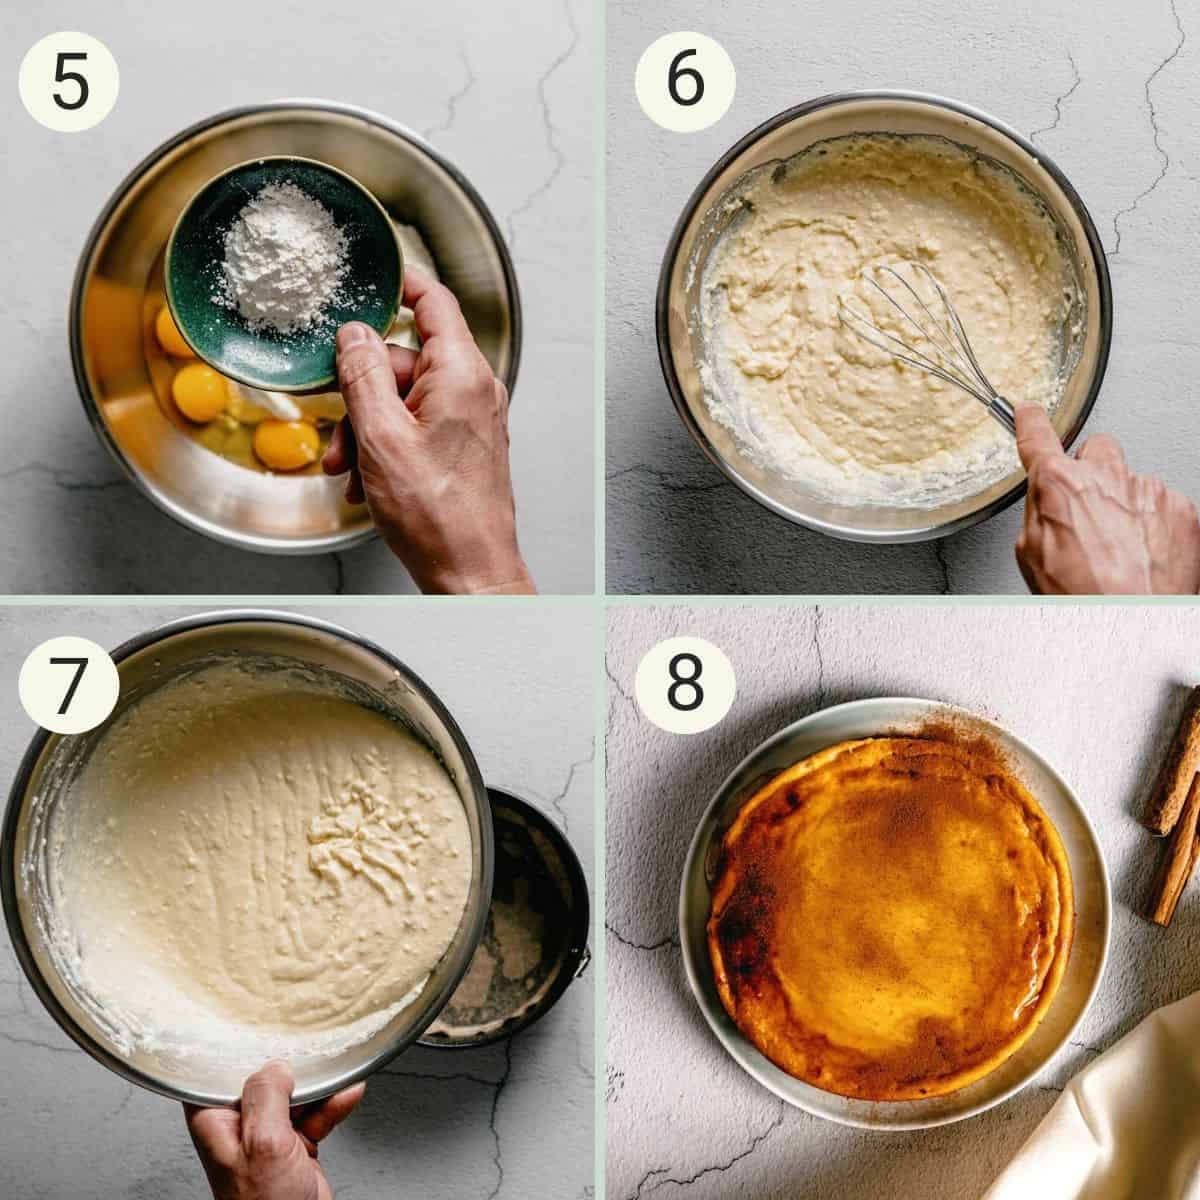 steps 5-8 of making melopita honey cheese pie: adding cornstarch to bowl, whisking the cheesecake mixture, pouring into a baking tin, and finishing with honey and cinnamon.